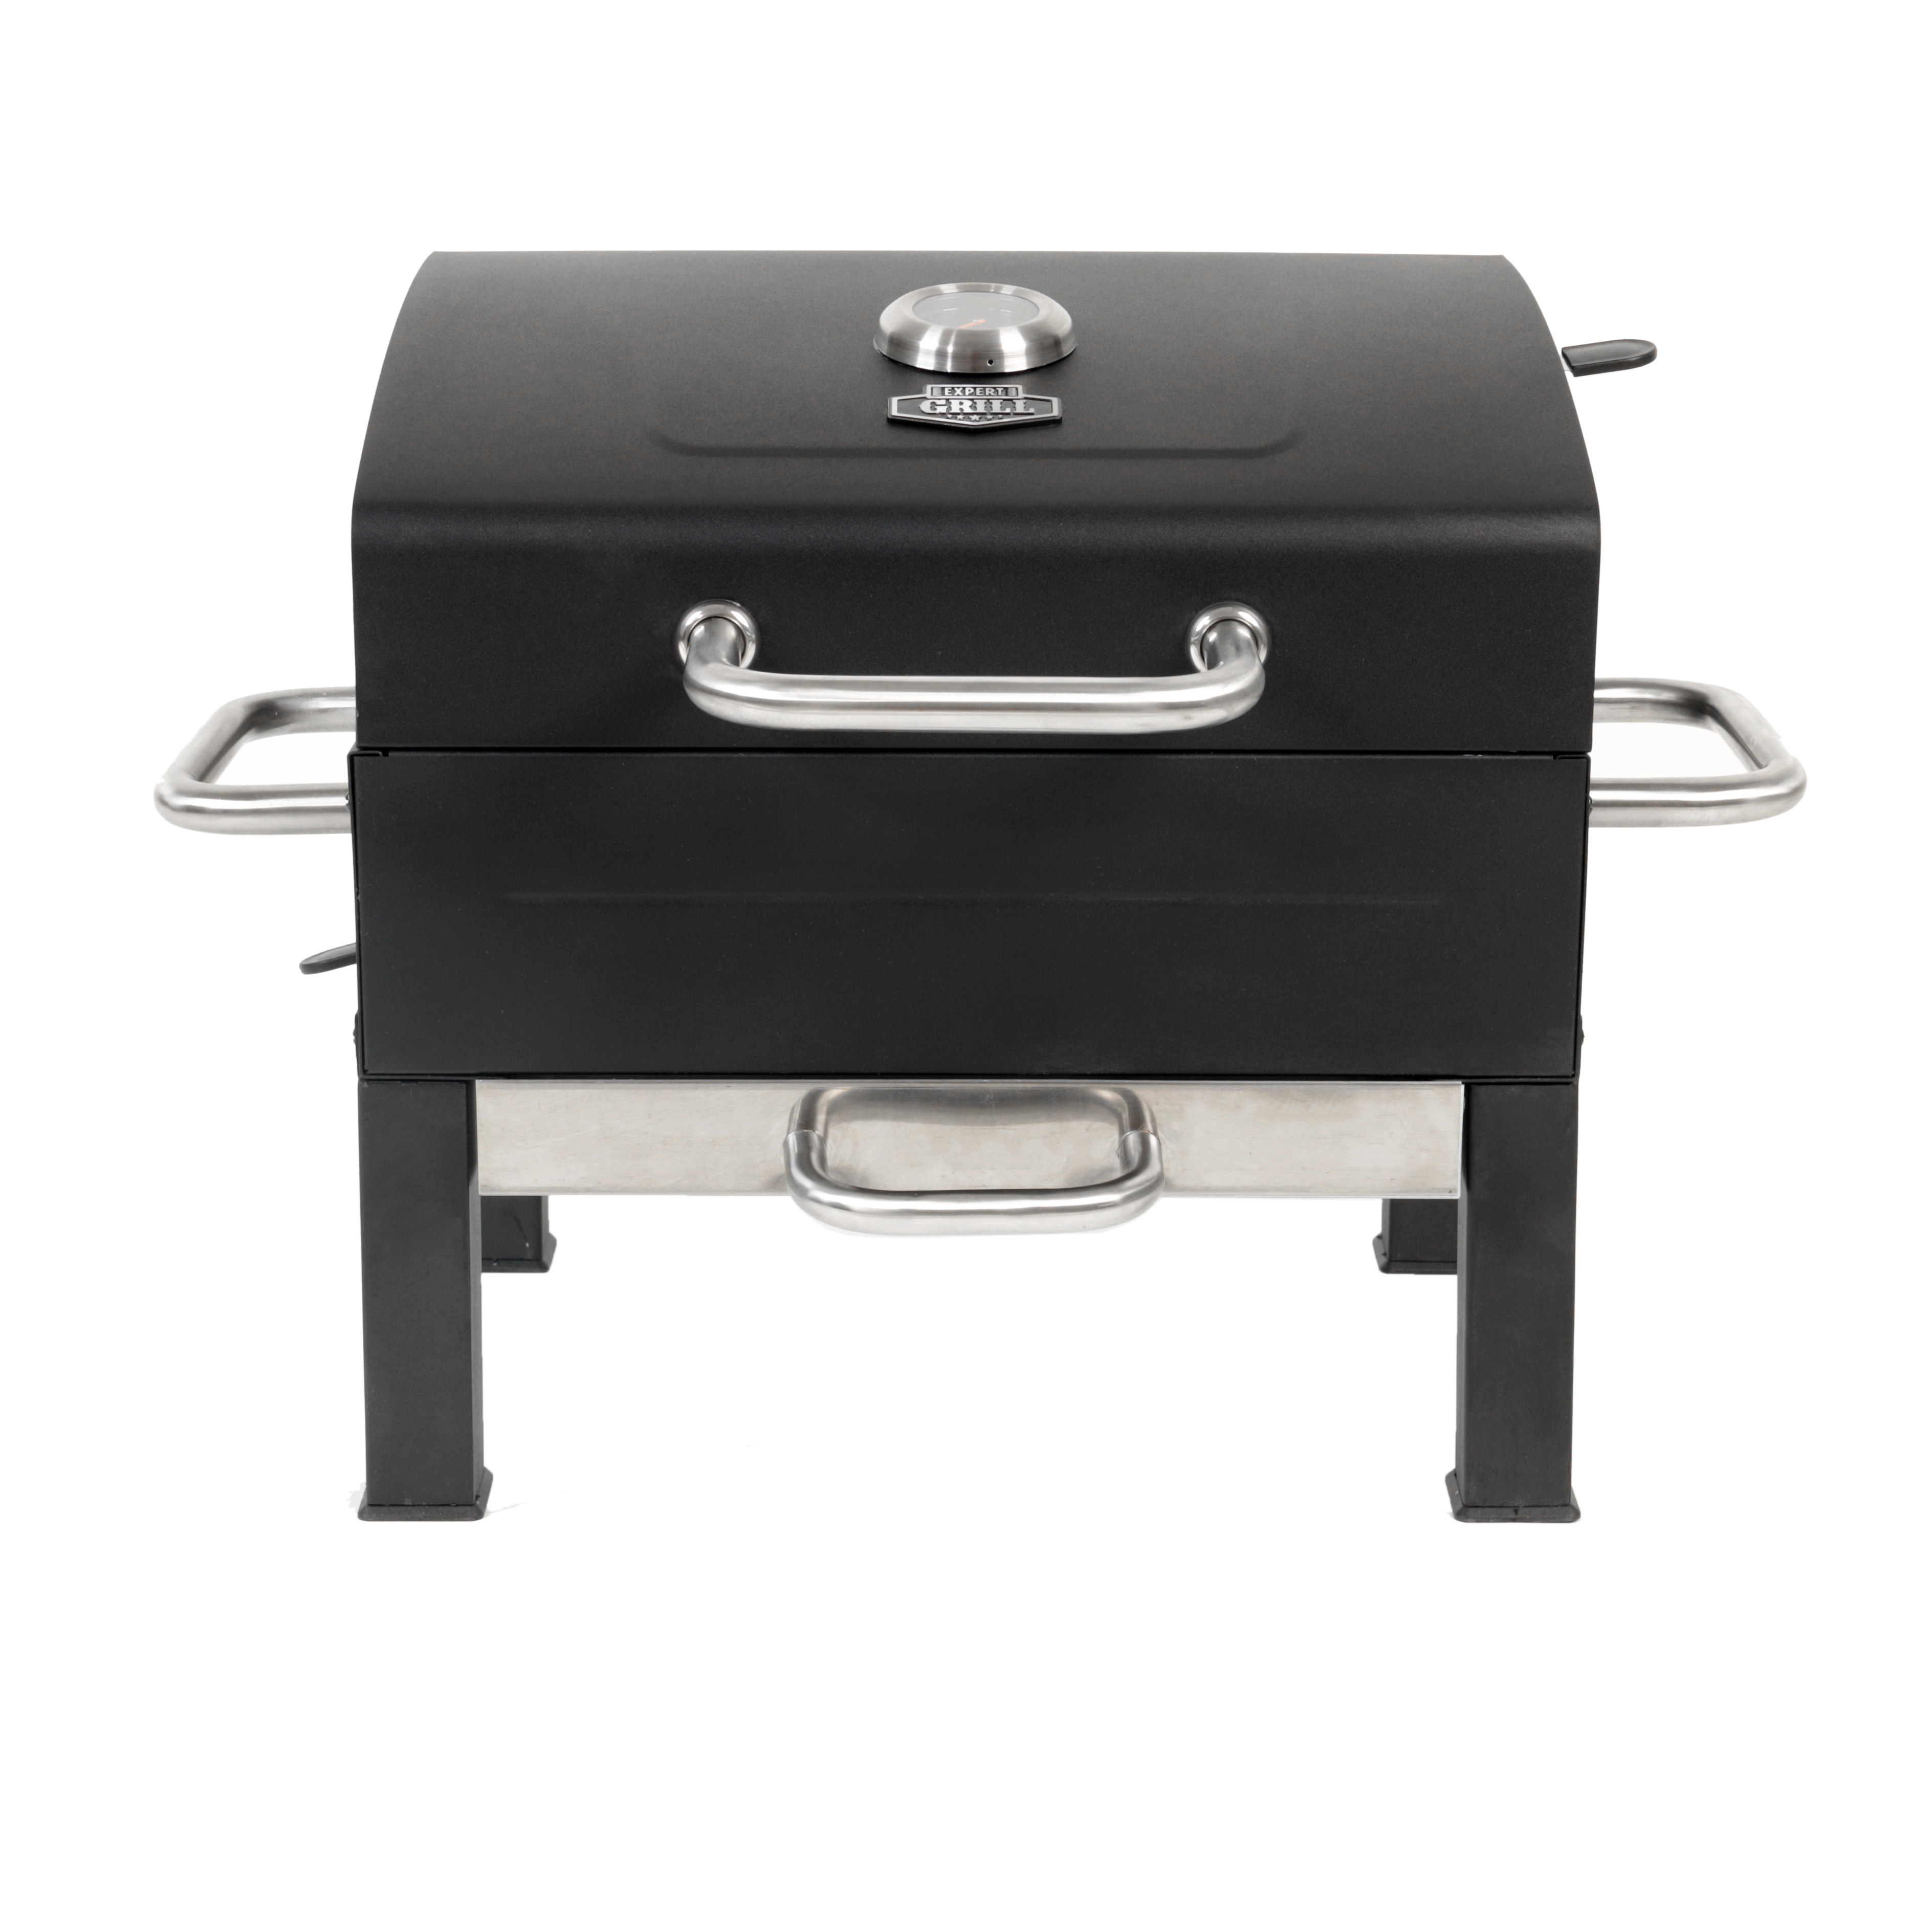 Expert Grill Premium Portable Charcoal Grill, Black and Stainless Steel - image 7 of 18